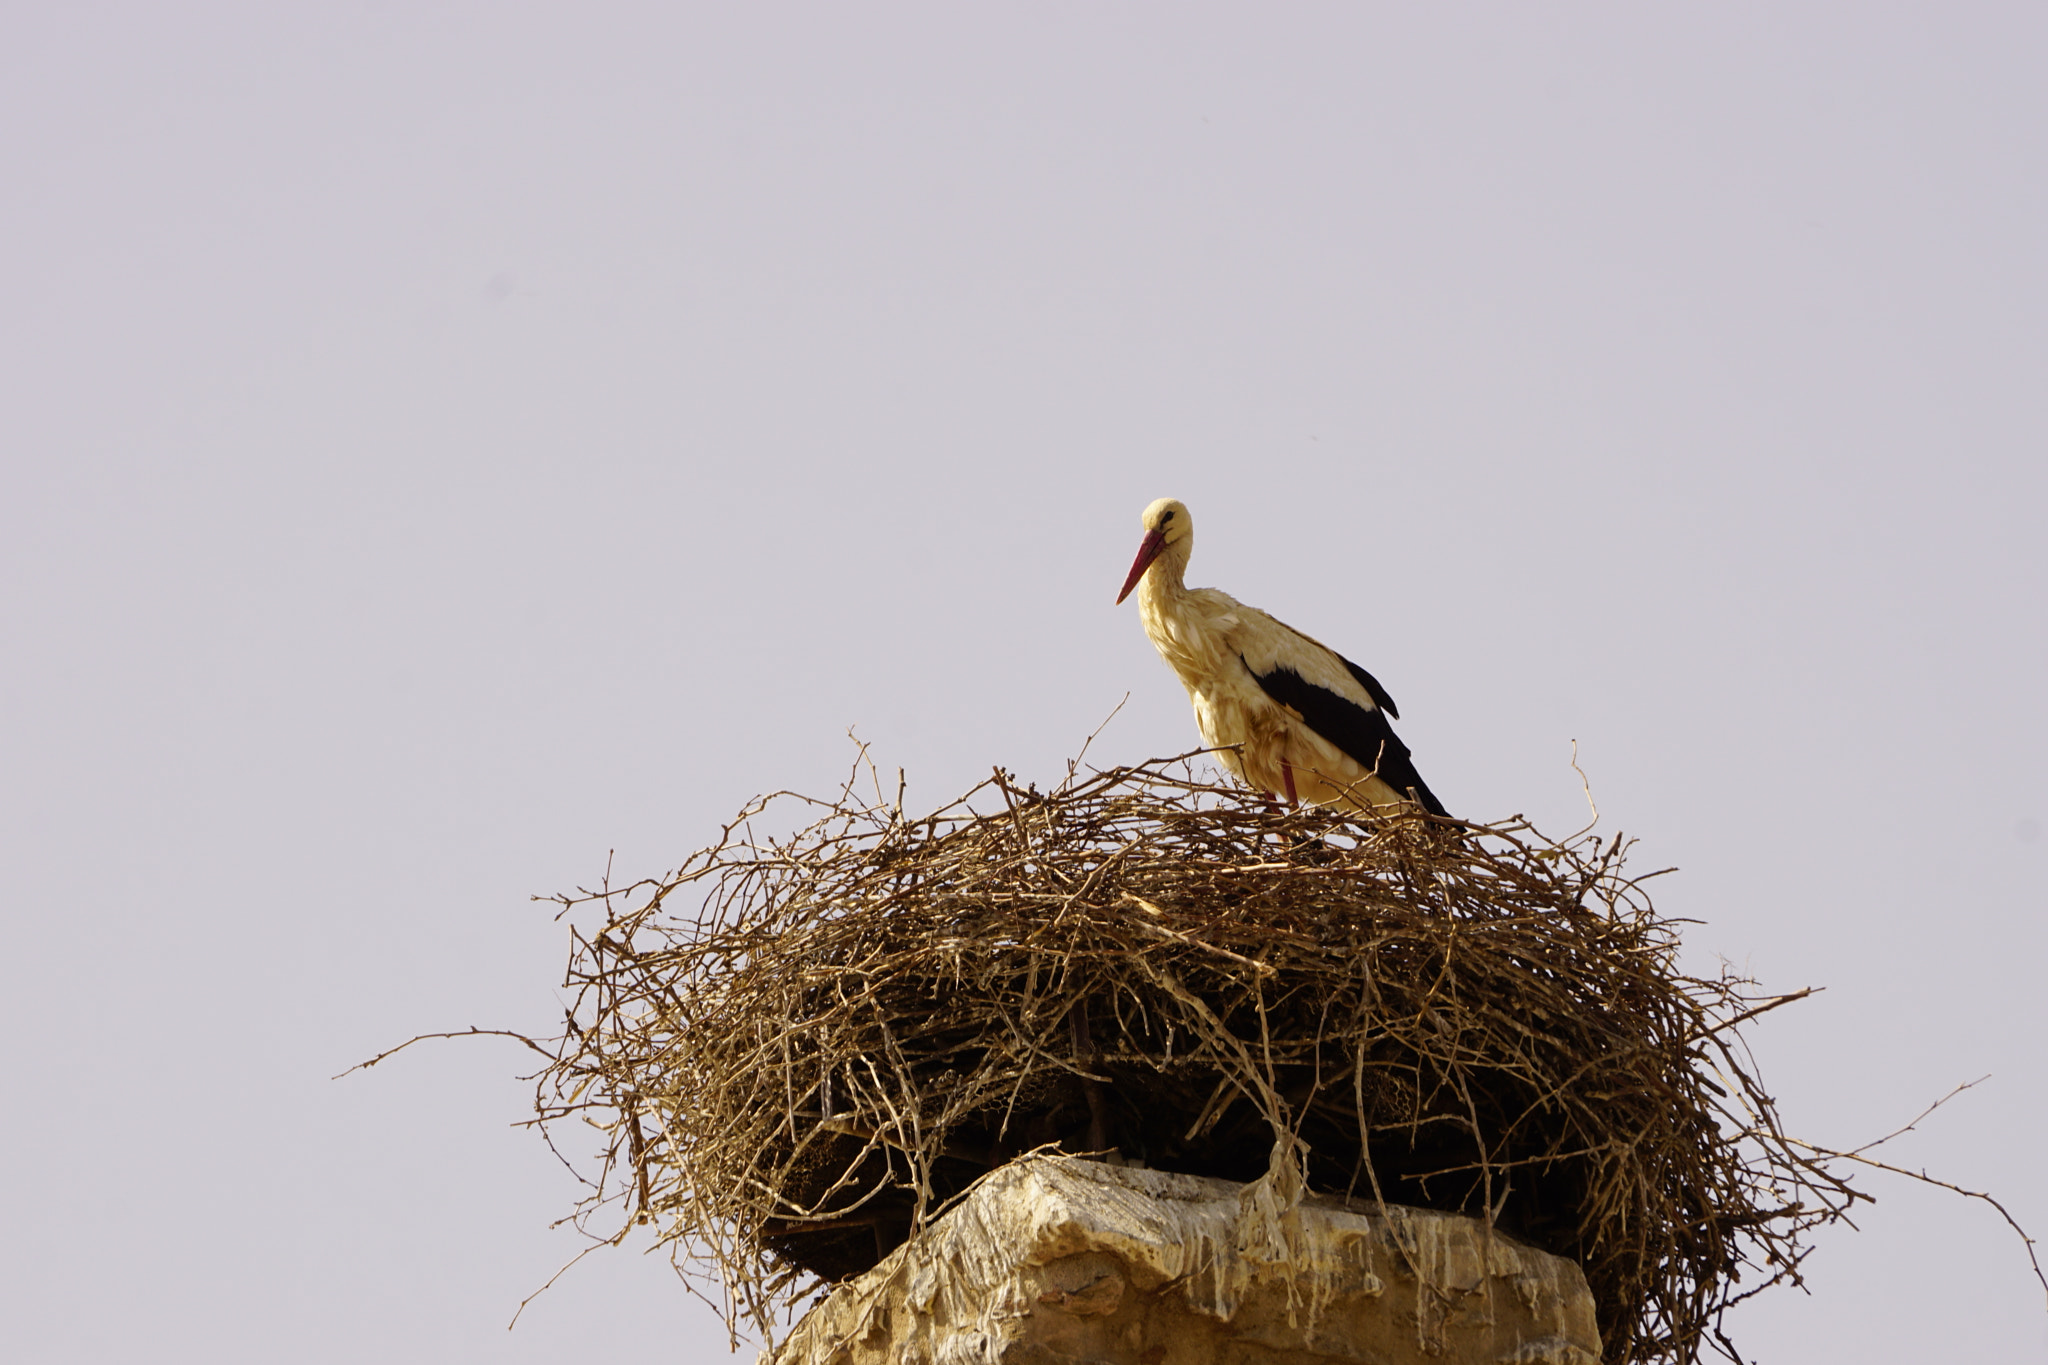 Sony a6000 sample photo. The look of a stork photography